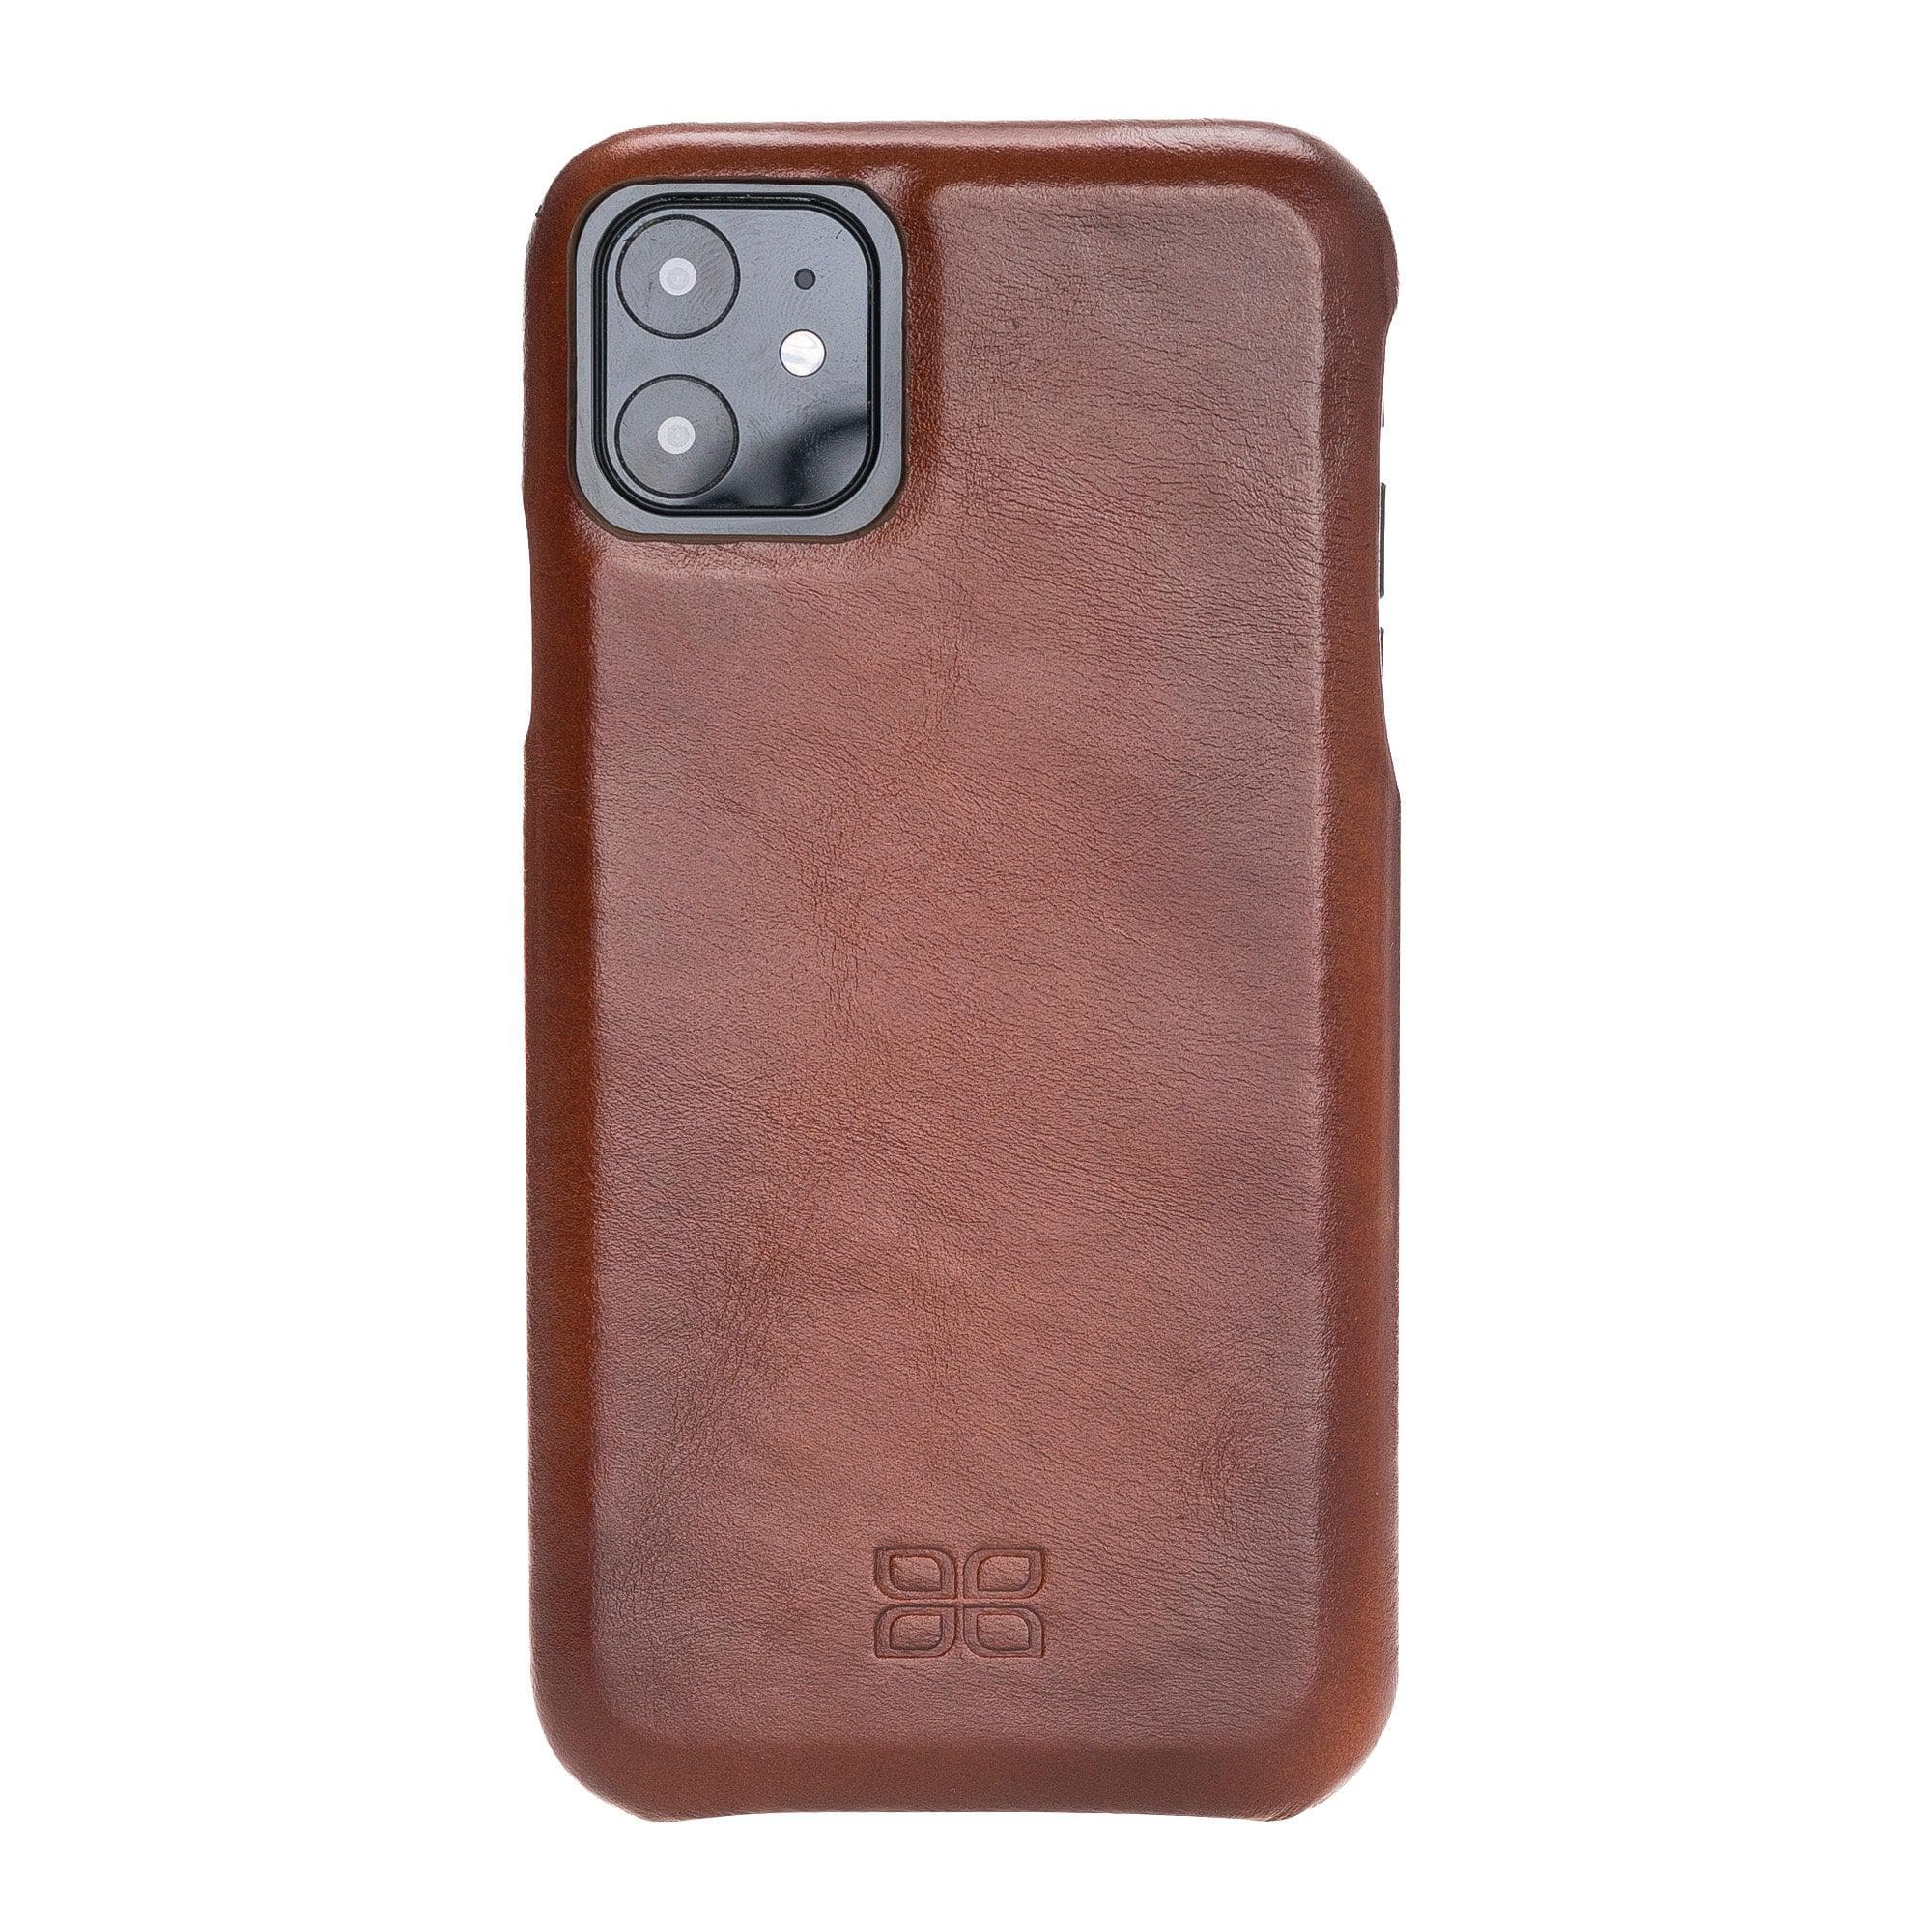 Bouletta Fully Leather Back Cover for Apple iPhone 11 Series İPhone 11 / Tan Bouletta LTD